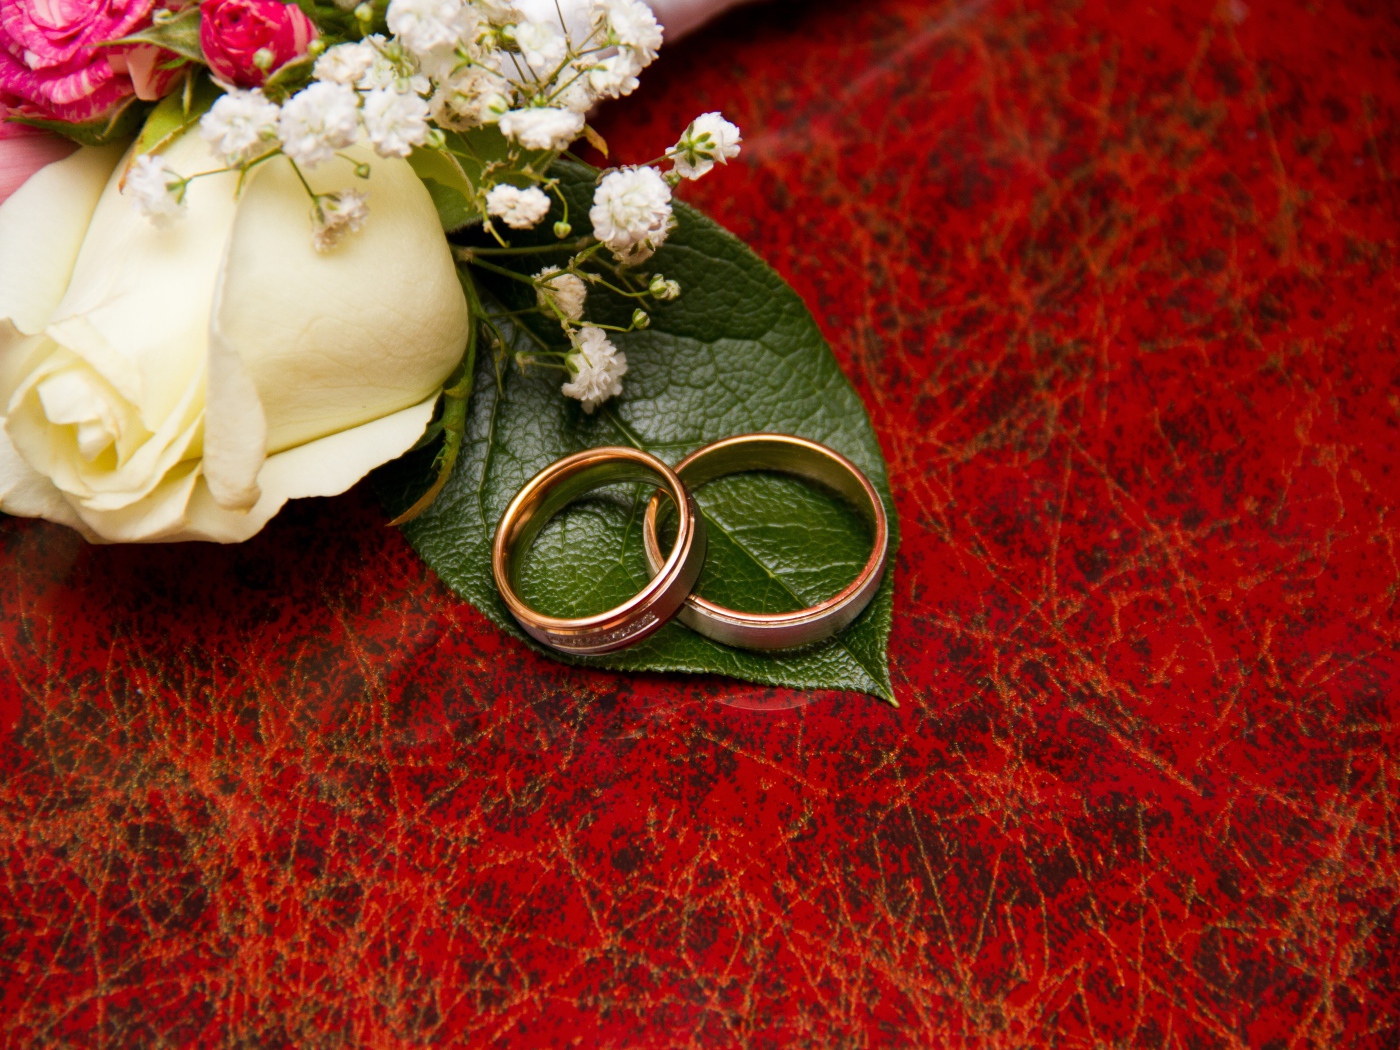 Gold wedding rings on a red background